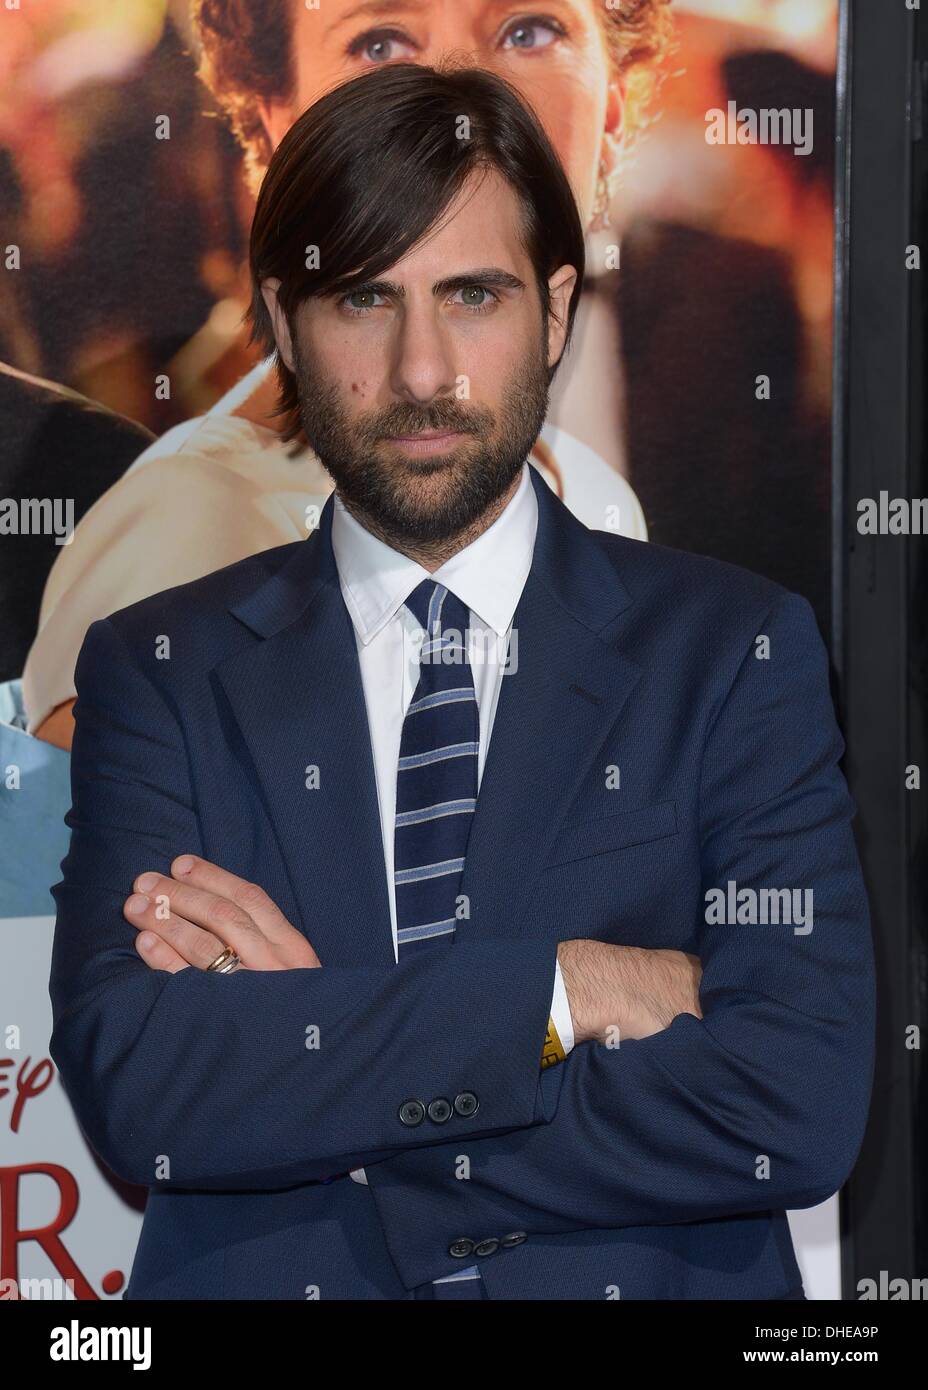 Los Angeles, USA. 7th November 2013. Jason Schwartzman at the film premiere for Saving Mr Banks at the TCL Chinese Theatre in Hollywood, CA Credit:  Sydney Alford/Alamy Live News Stock Photo